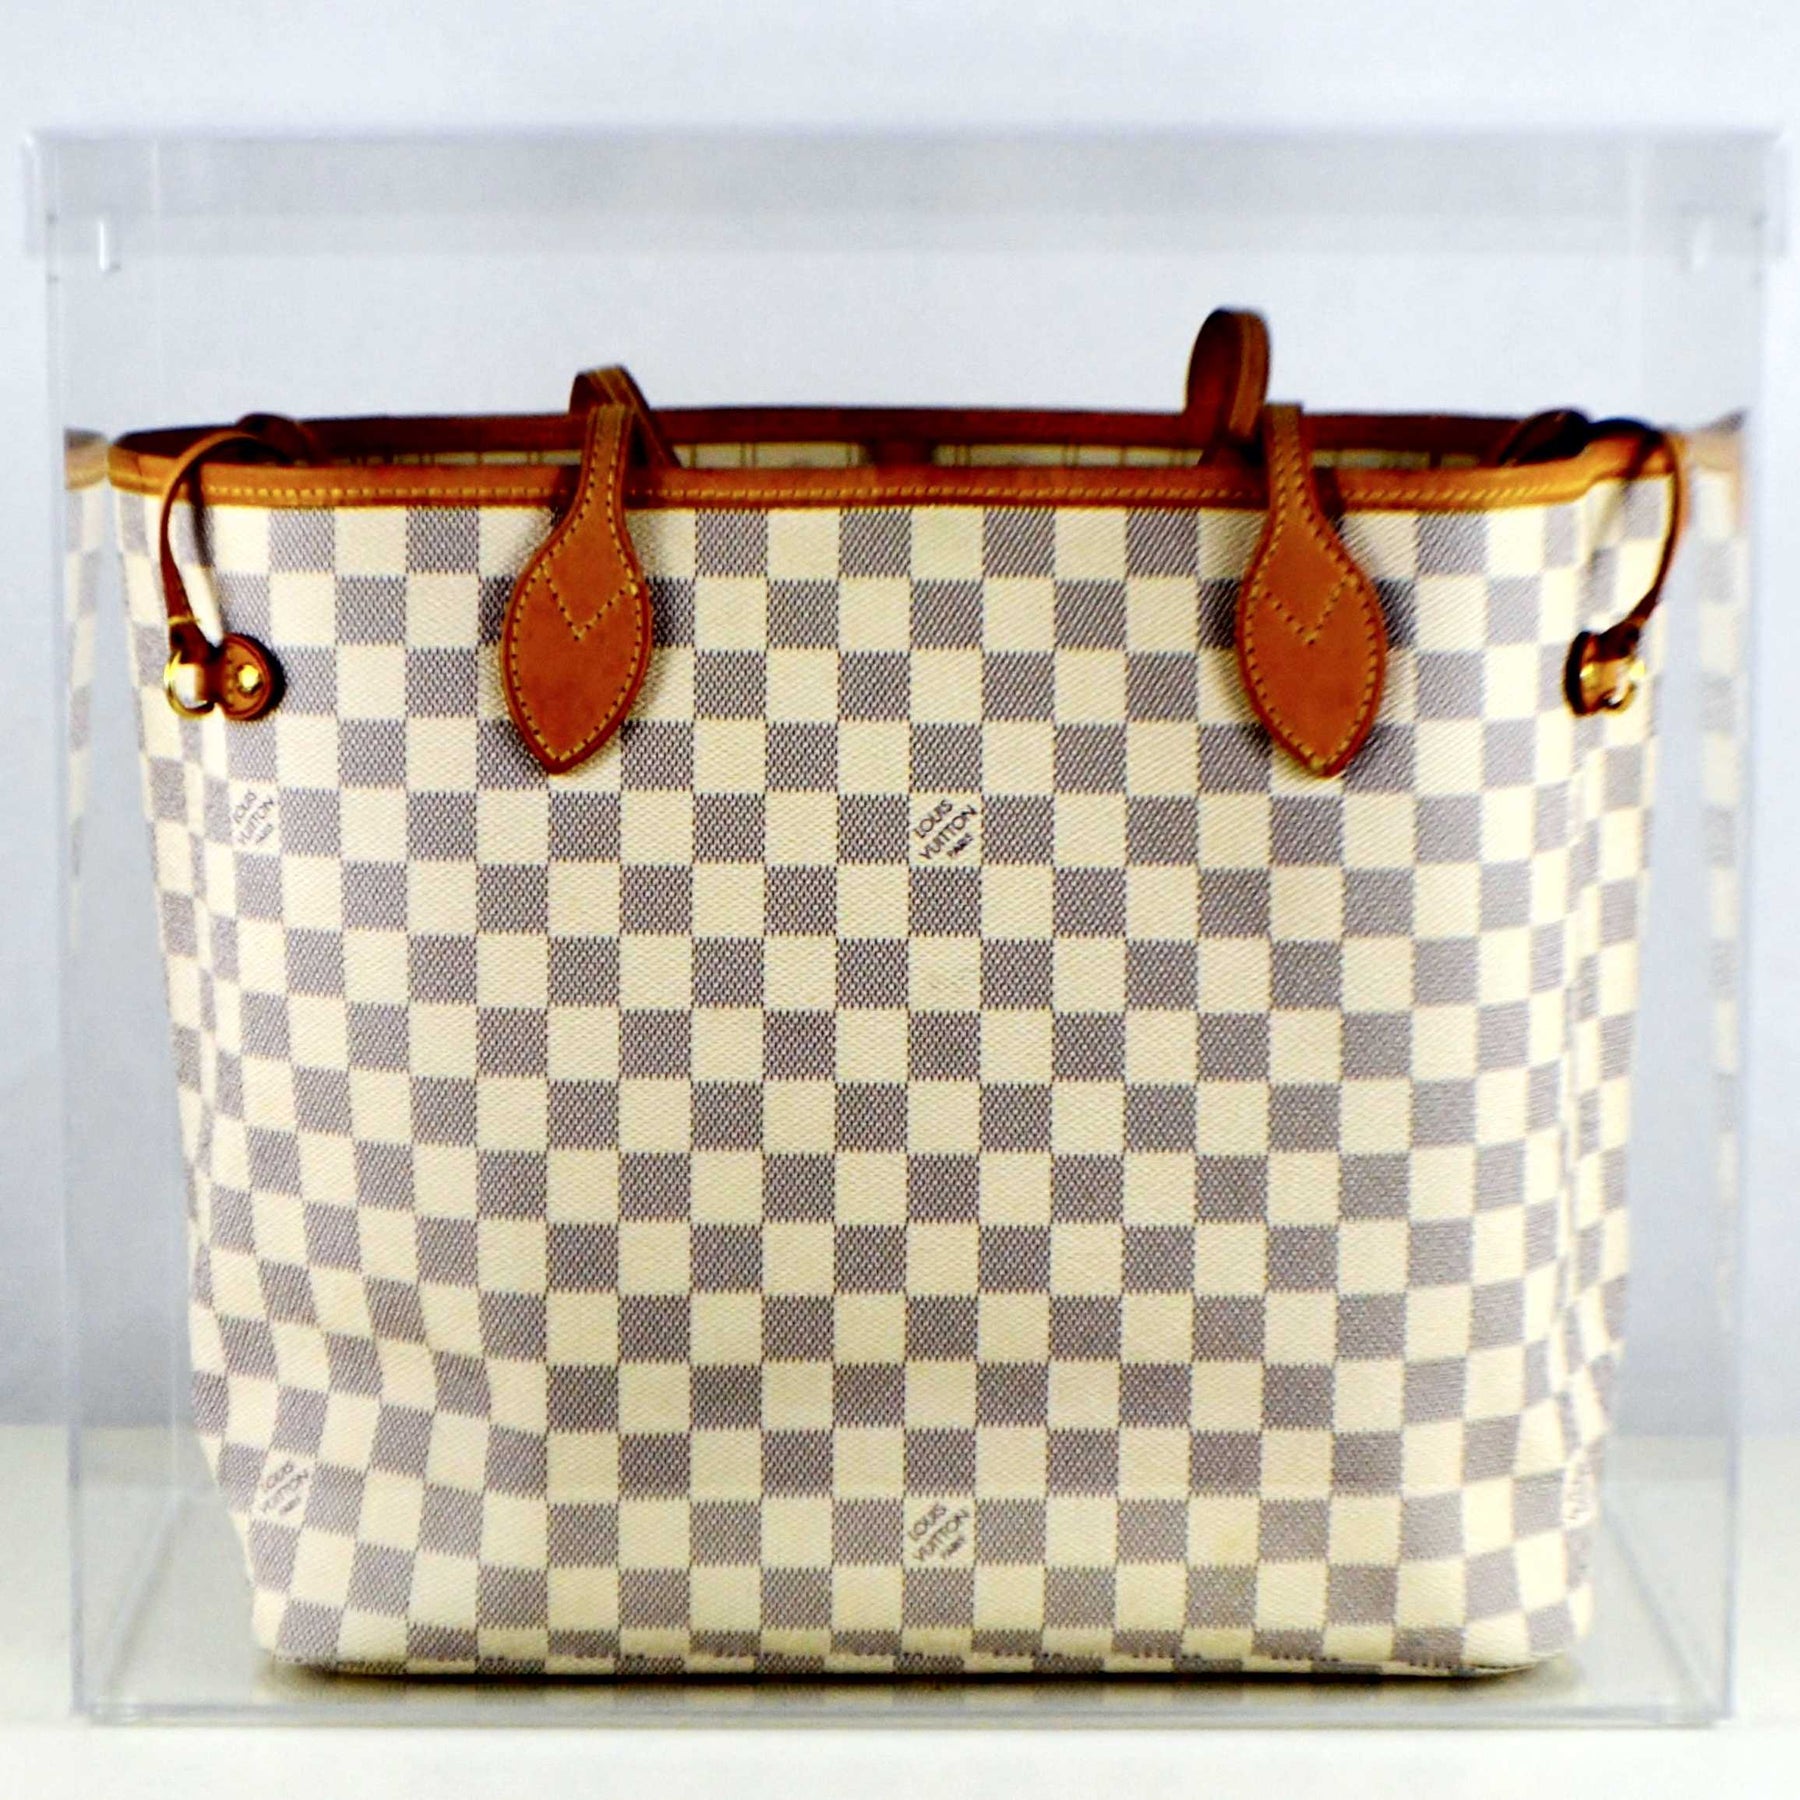 Louis Vuitton Neverfull NM Tote Damier PM